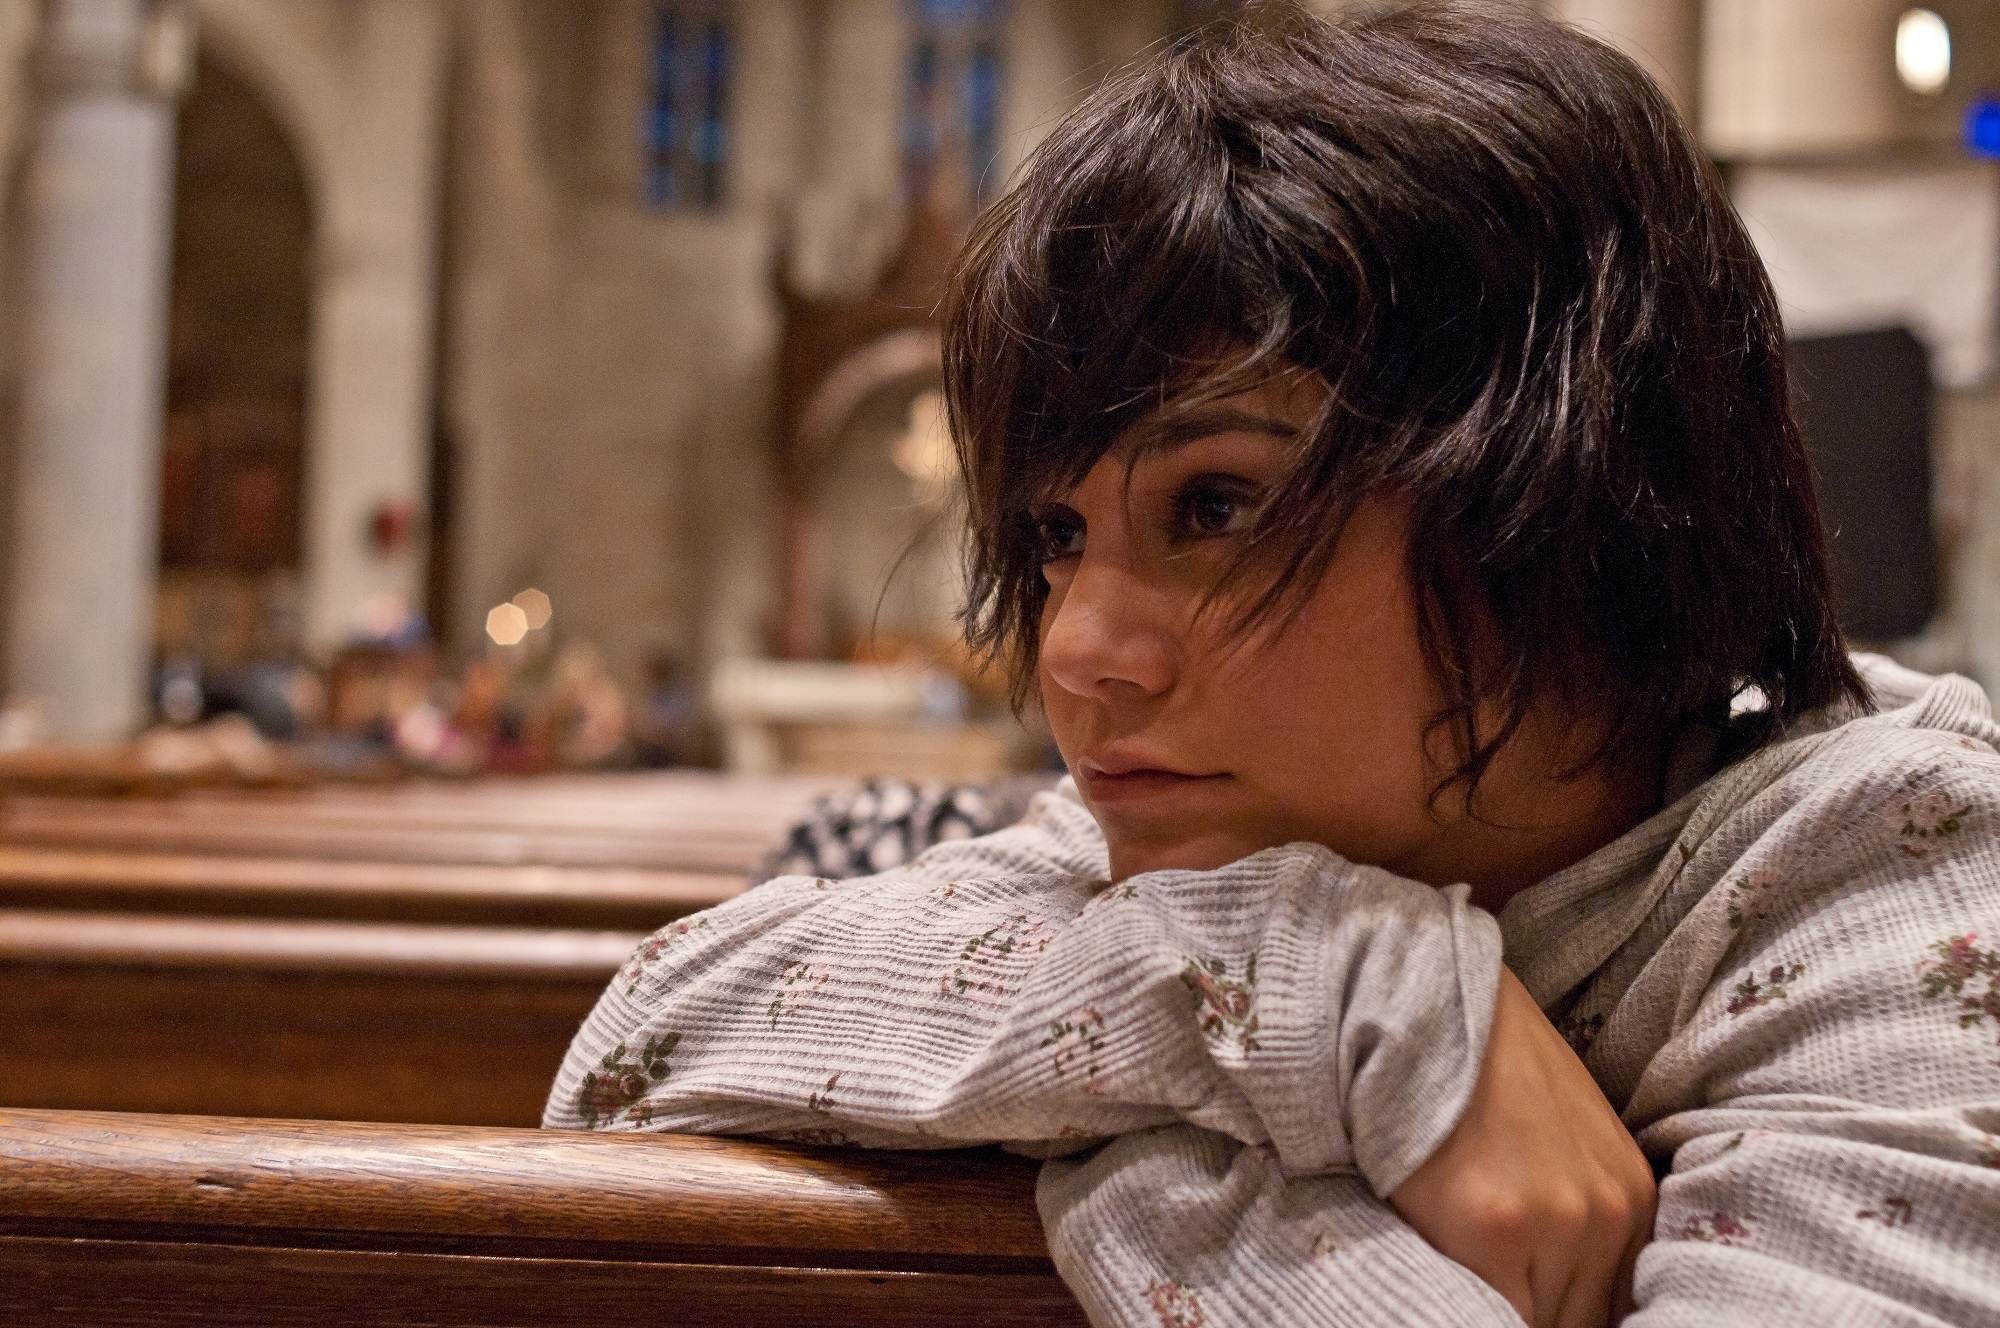 Vanessa Hudgens searches for a purpose in her life in Gimme Shelter.